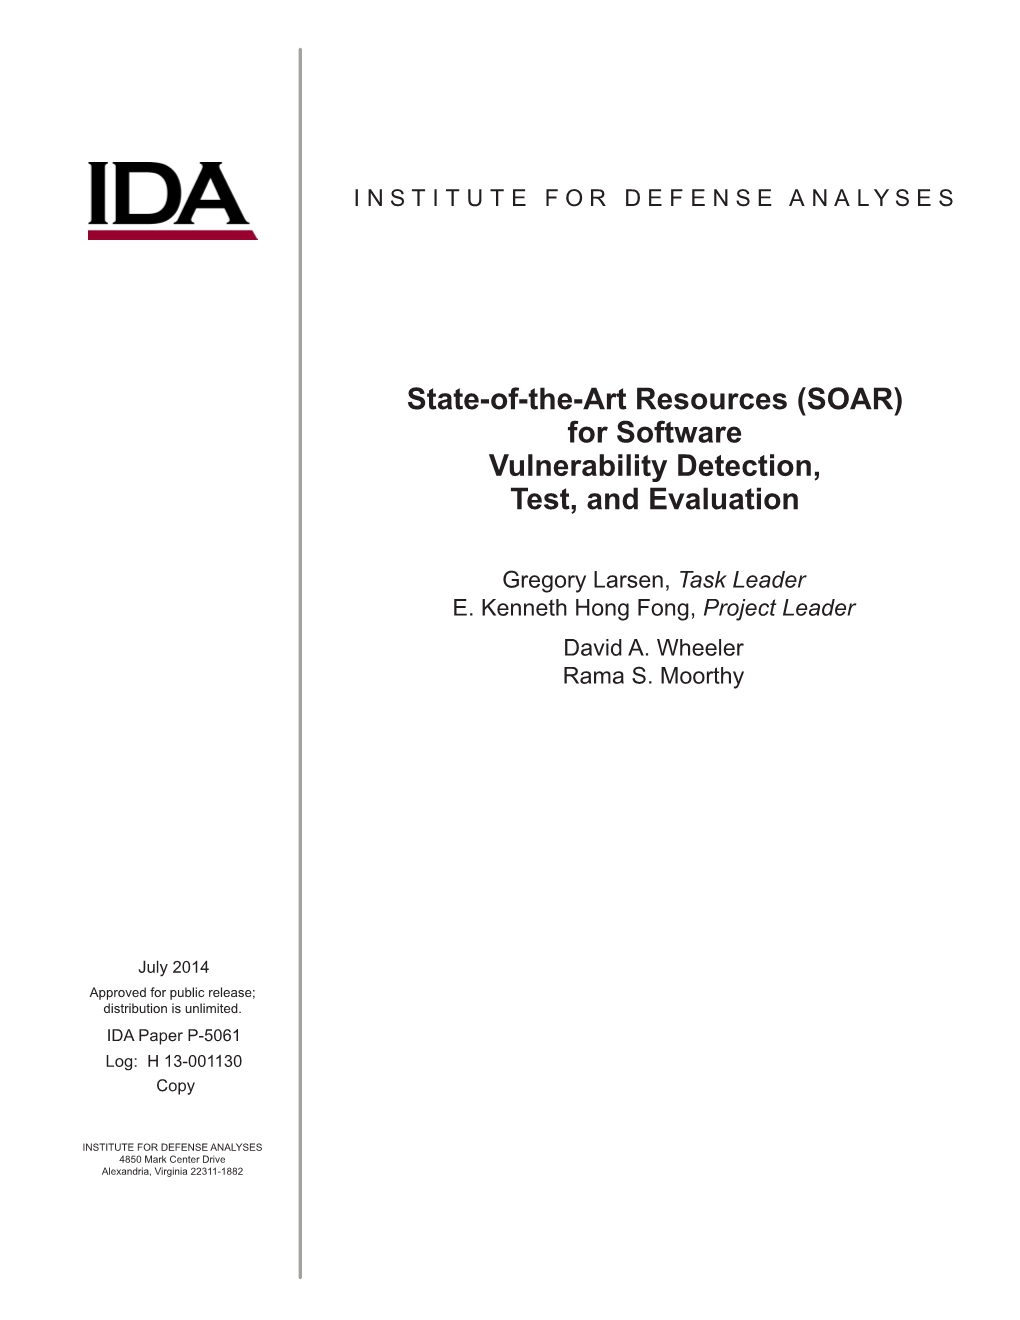 State-Of-The-Art Resources (SOAR) for Software Vulnerability Detection, Test, and Evaluation